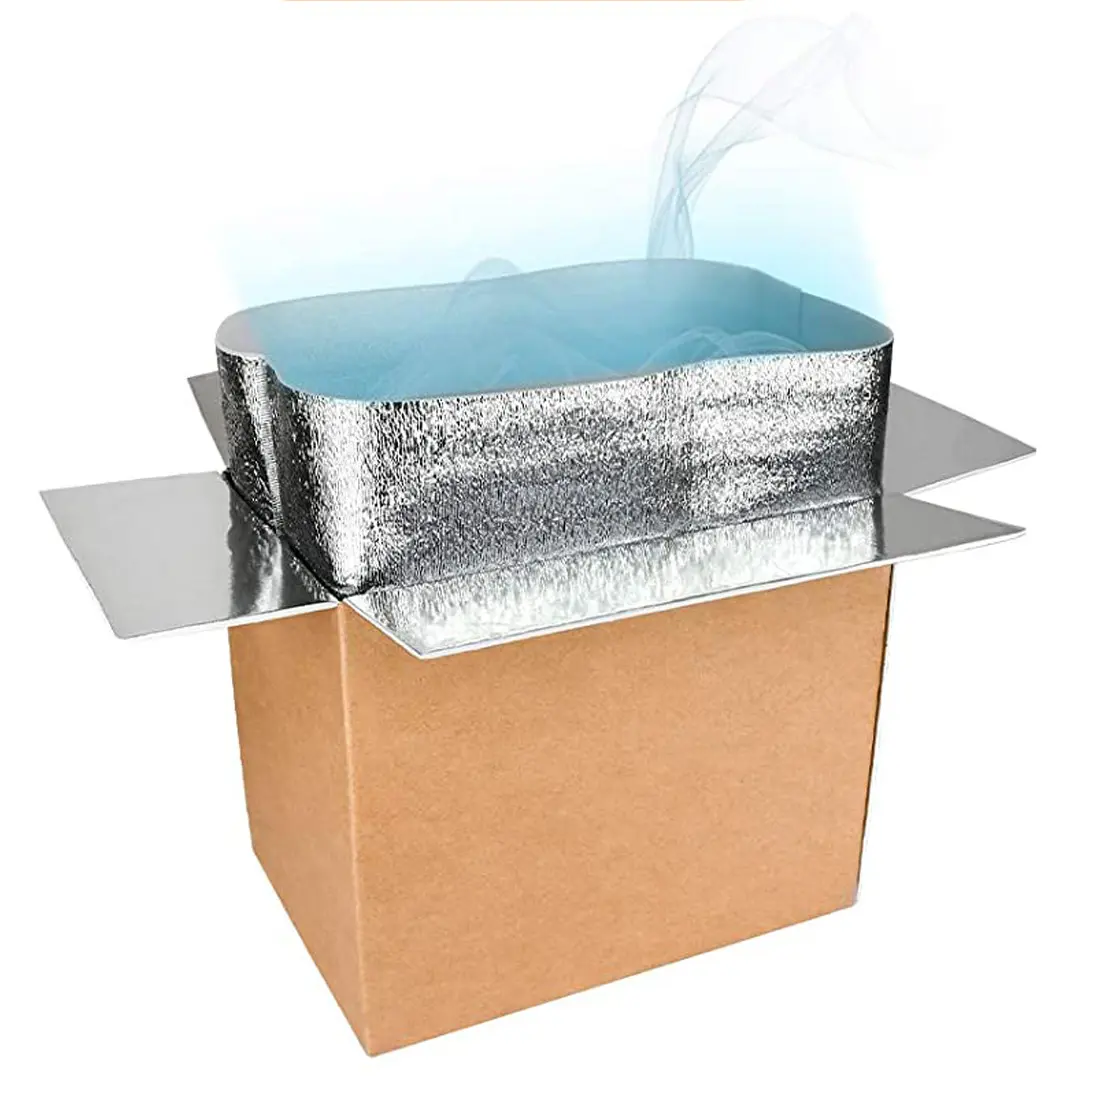 Double Insulated Carton with Foil Insulated Bag Liner Small Mailing Box Shipping Box for Mailing Shipping Packing Moving